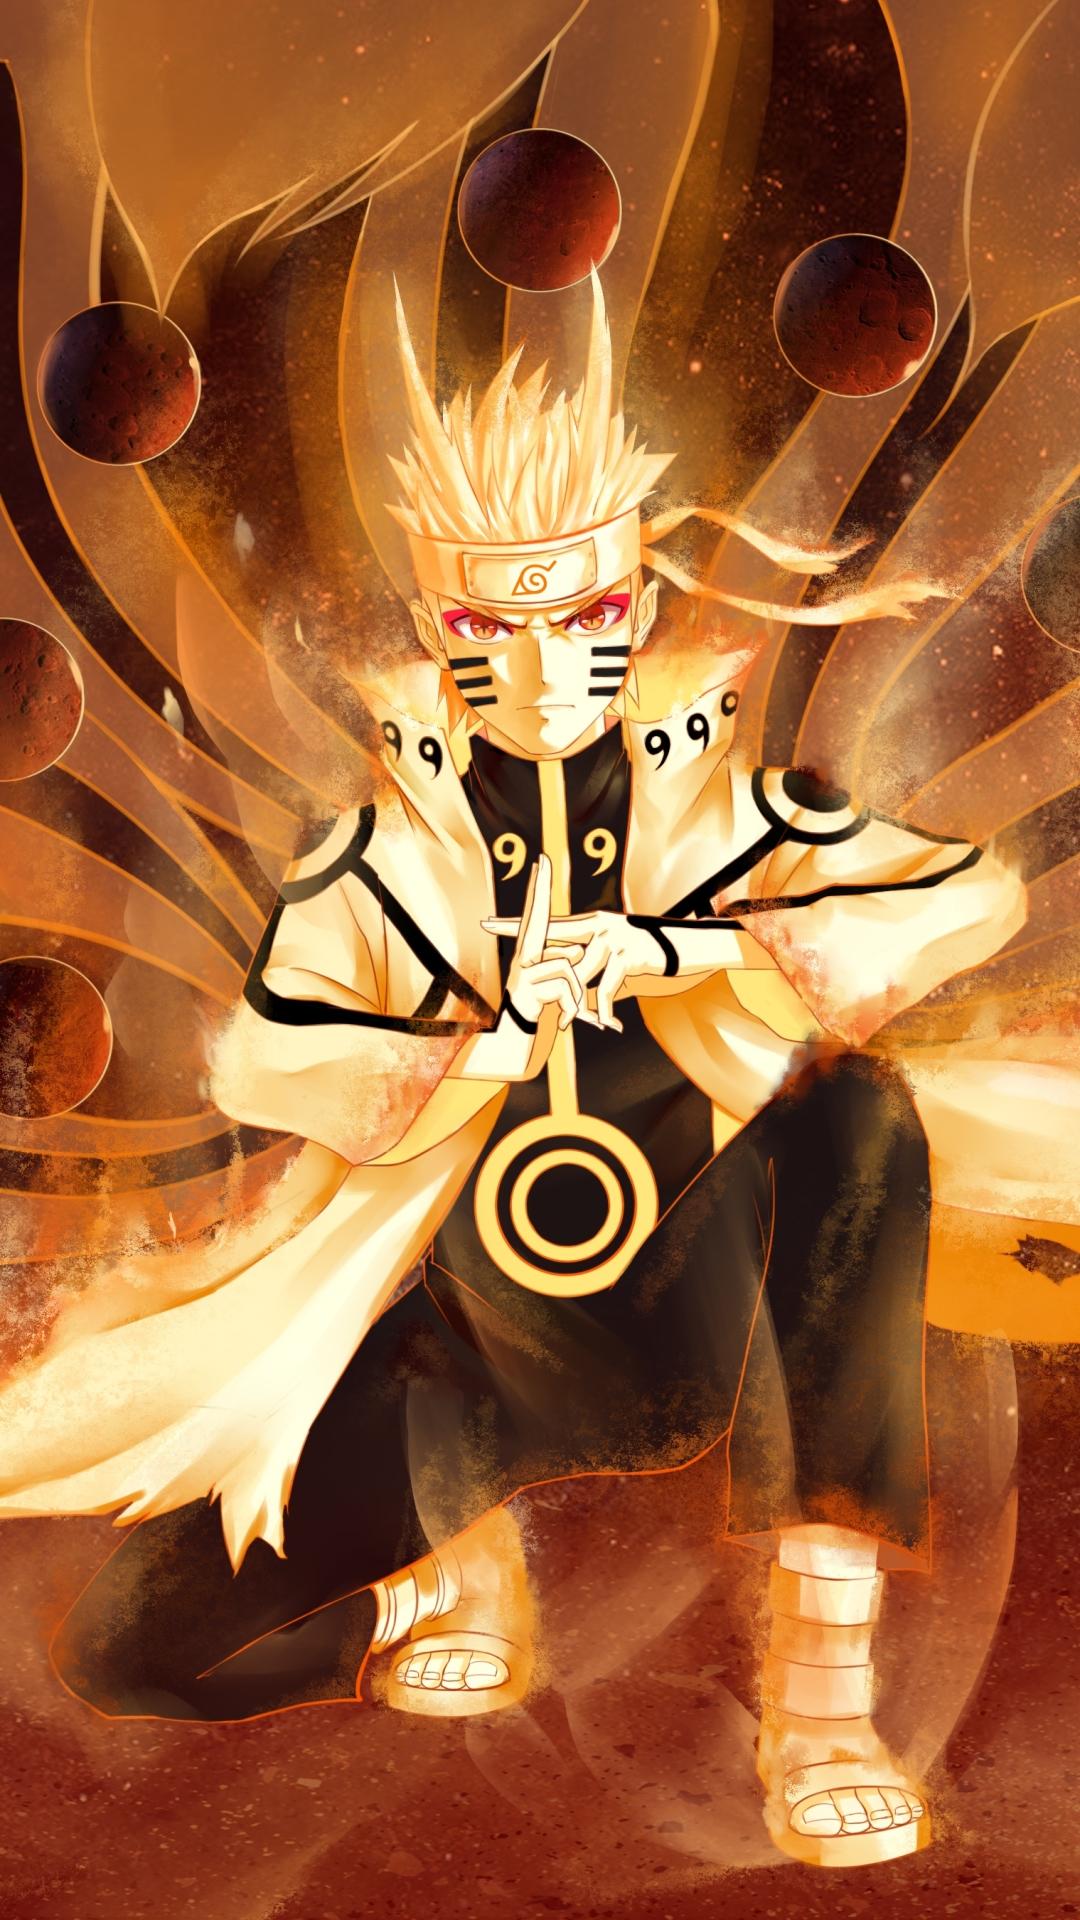 Naruto 1080x1920 Wallpapers - Top Free Naruto 1080x1920 Backgrounds ...